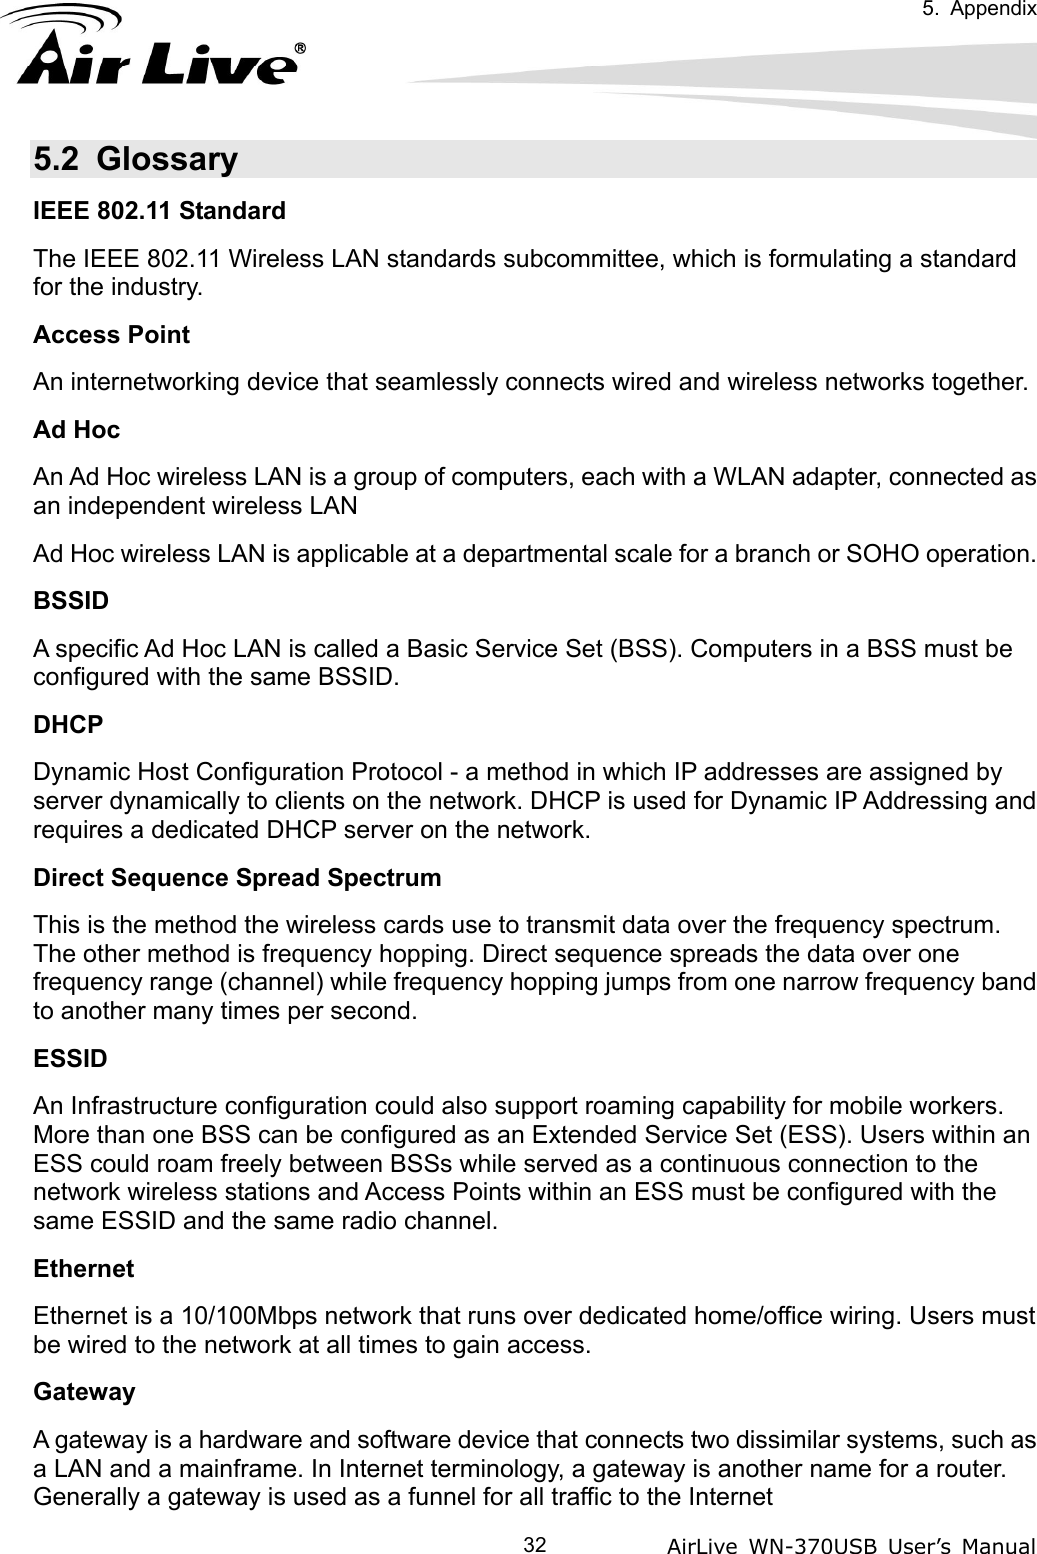   5. Appendix            AirLive WN-370USB User’s Manual  325.2 Glossary  IEEE 802.11 Standard The IEEE 802.11 Wireless LAN standards subcommittee, which is formulating a standard for the industry. Access Point An internetworking device that seamlessly connects wired and wireless networks together. Ad Hoc An Ad Hoc wireless LAN is a group of computers, each with a WLAN adapter, connected as an independent wireless LAN Ad Hoc wireless LAN is applicable at a departmental scale for a branch or SOHO operation. BSSID A specific Ad Hoc LAN is called a Basic Service Set (BSS). Computers in a BSS must be configured with the same BSSID. DHCP Dynamic Host Configuration Protocol - a method in which IP addresses are assigned by server dynamically to clients on the network. DHCP is used for Dynamic IP Addressing and requires a dedicated DHCP server on the network. Direct Sequence Spread Spectrum This is the method the wireless cards use to transmit data over the frequency spectrum. The other method is frequency hopping. Direct sequence spreads the data over one frequency range (channel) while frequency hopping jumps from one narrow frequency band to another many times per second. ESSID An Infrastructure configuration could also support roaming capability for mobile workers. More than one BSS can be configured as an Extended Service Set (ESS). Users within an ESS could roam freely between BSSs while served as a continuous connection to the network wireless stations and Access Points within an ESS must be configured with the same ESSID and the same radio channel. Ethernet Ethernet is a 10/100Mbps network that runs over dedicated home/office wiring. Users must be wired to the network at all times to gain access. Gateway A gateway is a hardware and software device that connects two dissimilar systems, such as a LAN and a mainframe. In Internet terminology, a gateway is another name for a router. Generally a gateway is used as a funnel for all traffic to the Internet 